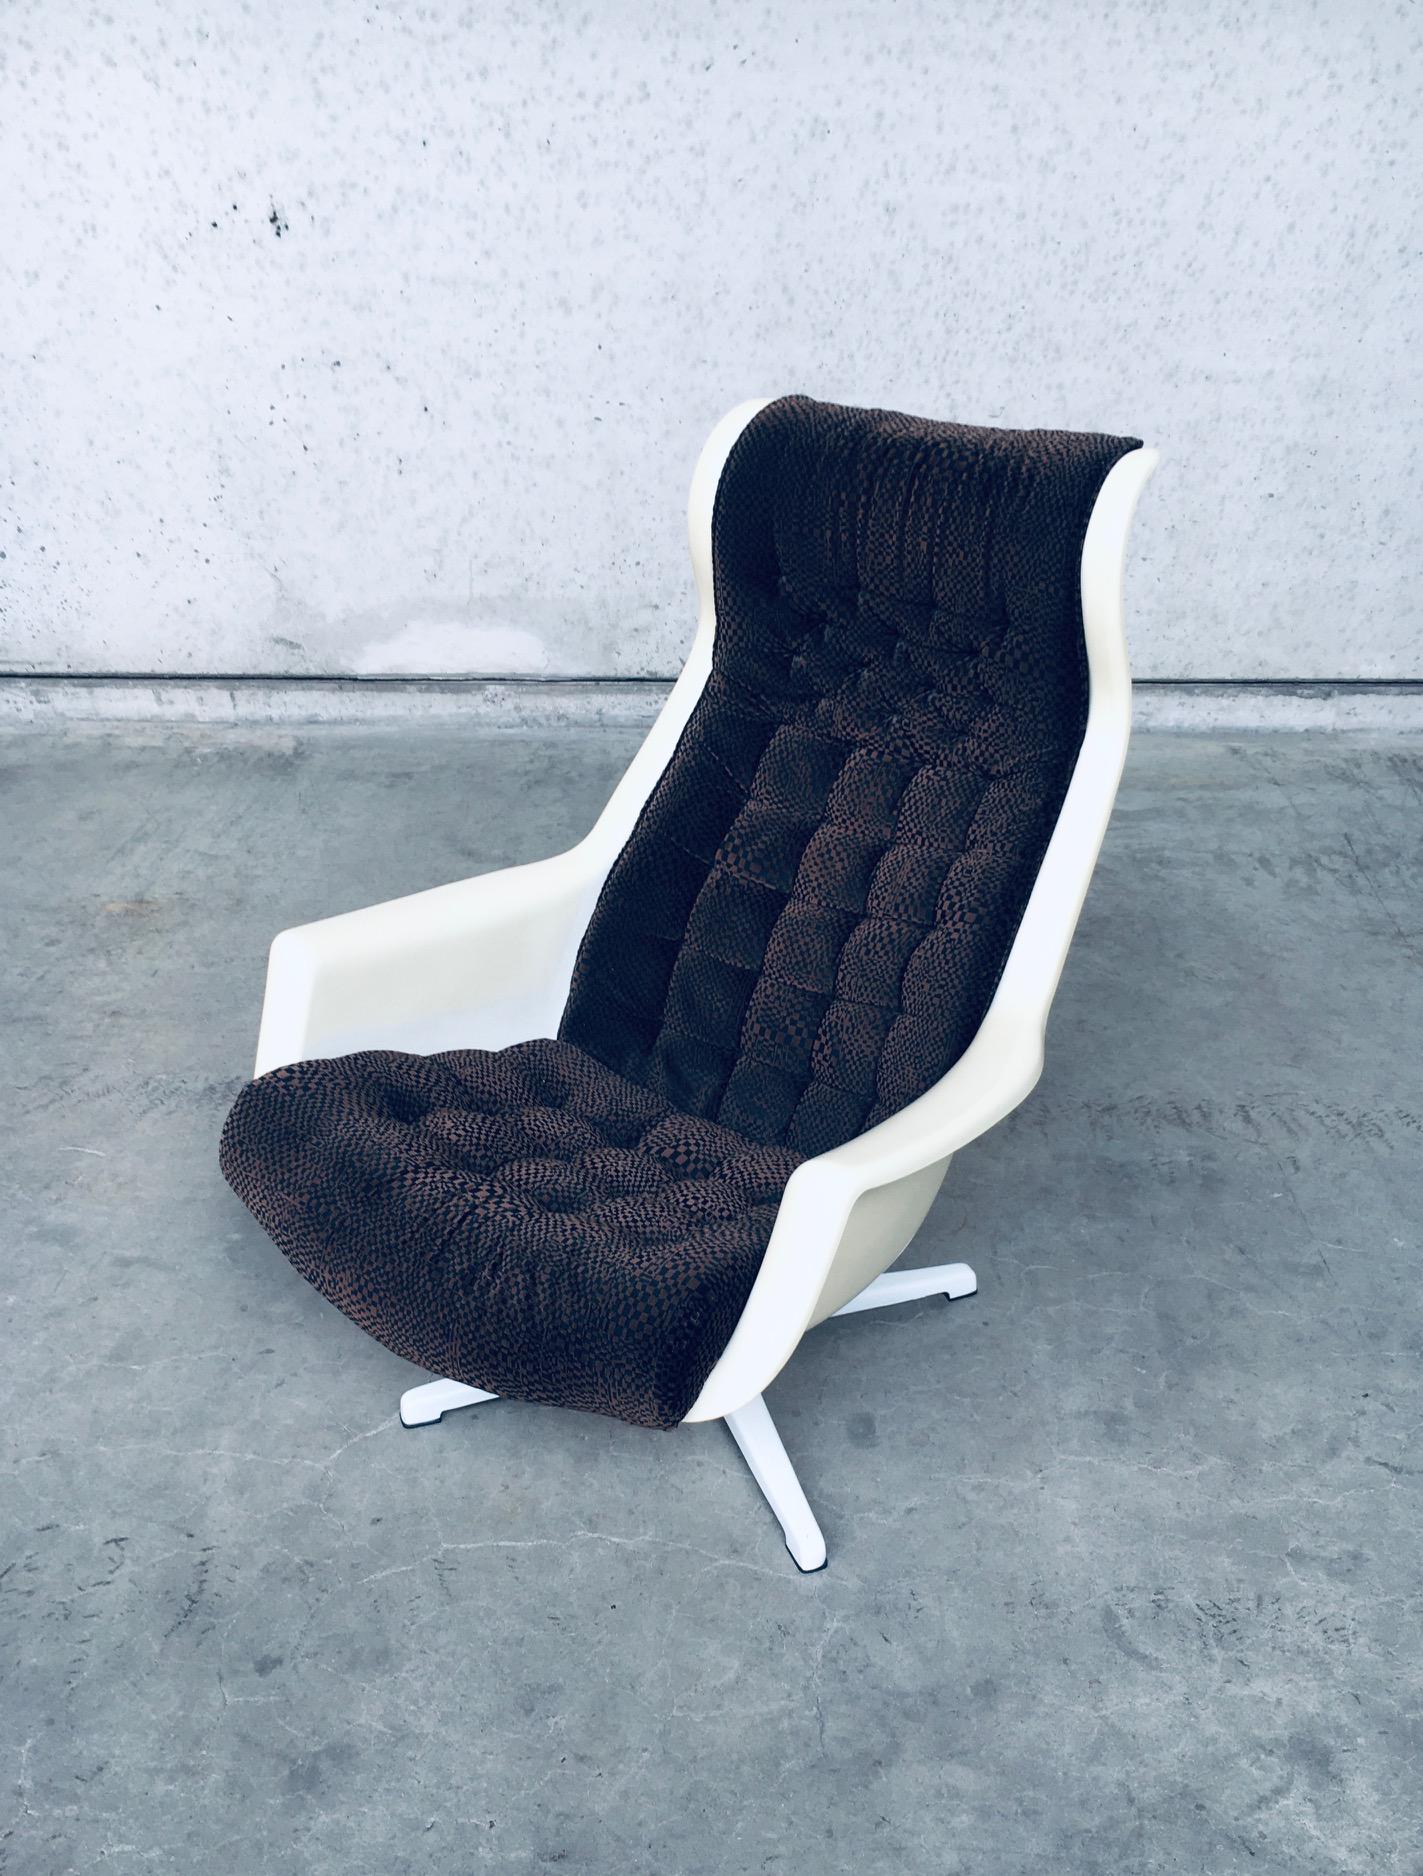 Vintage Midcentury Modern Scandinavian Design 'GALAXY' Lounge Chair by Alf Svensson & Yngvar Sandström for Dux, made in Denmark 1960's. Space Age Swivel lounge armchair in cream plastic with brown patterend fabric seat and back. All original, marked